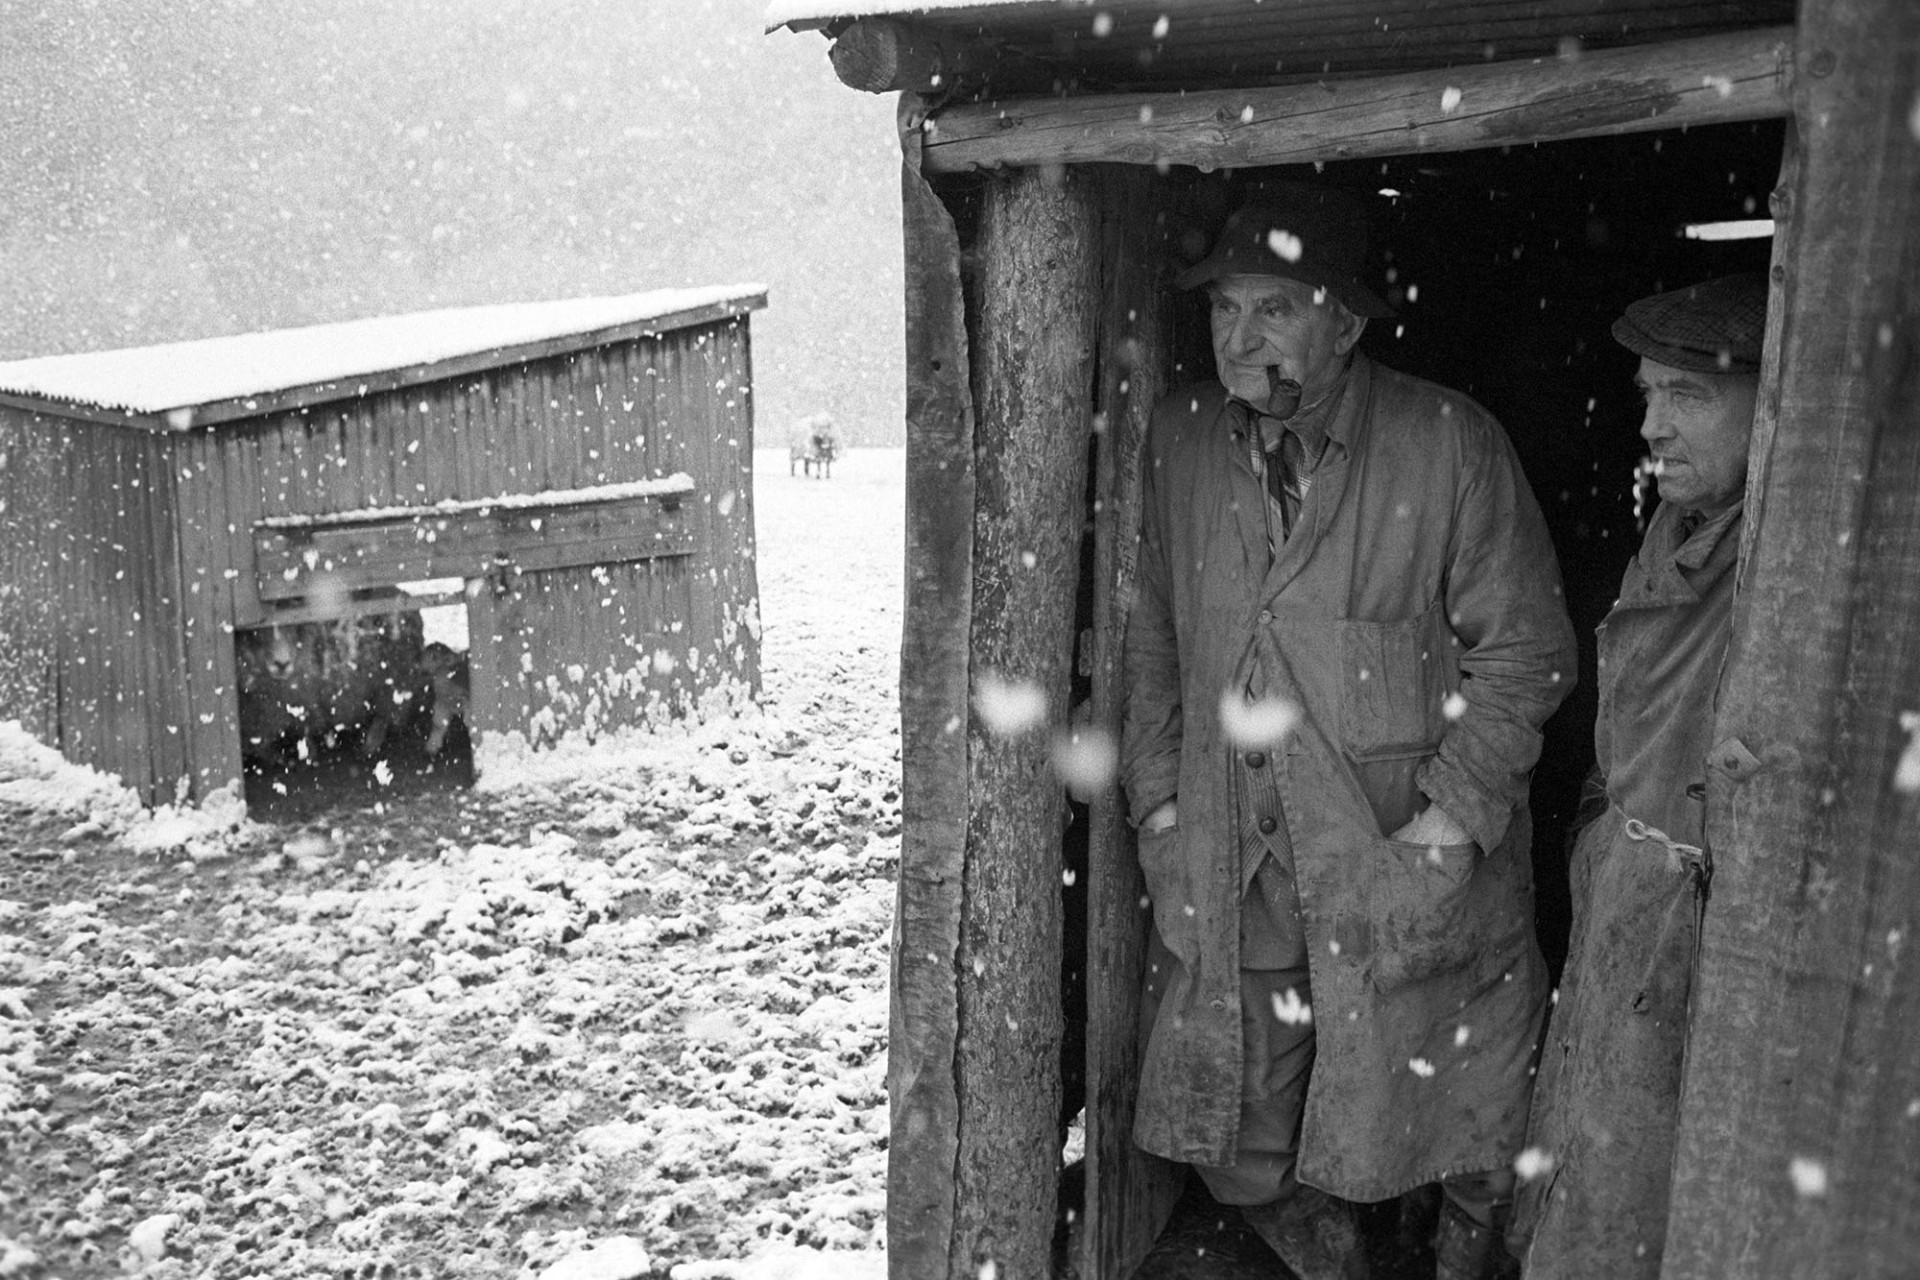 Two shepherds sheltering from the snow in shed door.
[Archie Parkhouse and Ivor Brock sheltering from snow in a shed doorway in a field at Millhams in Dolton. Archie Parkhouse is smoking a pipe.]